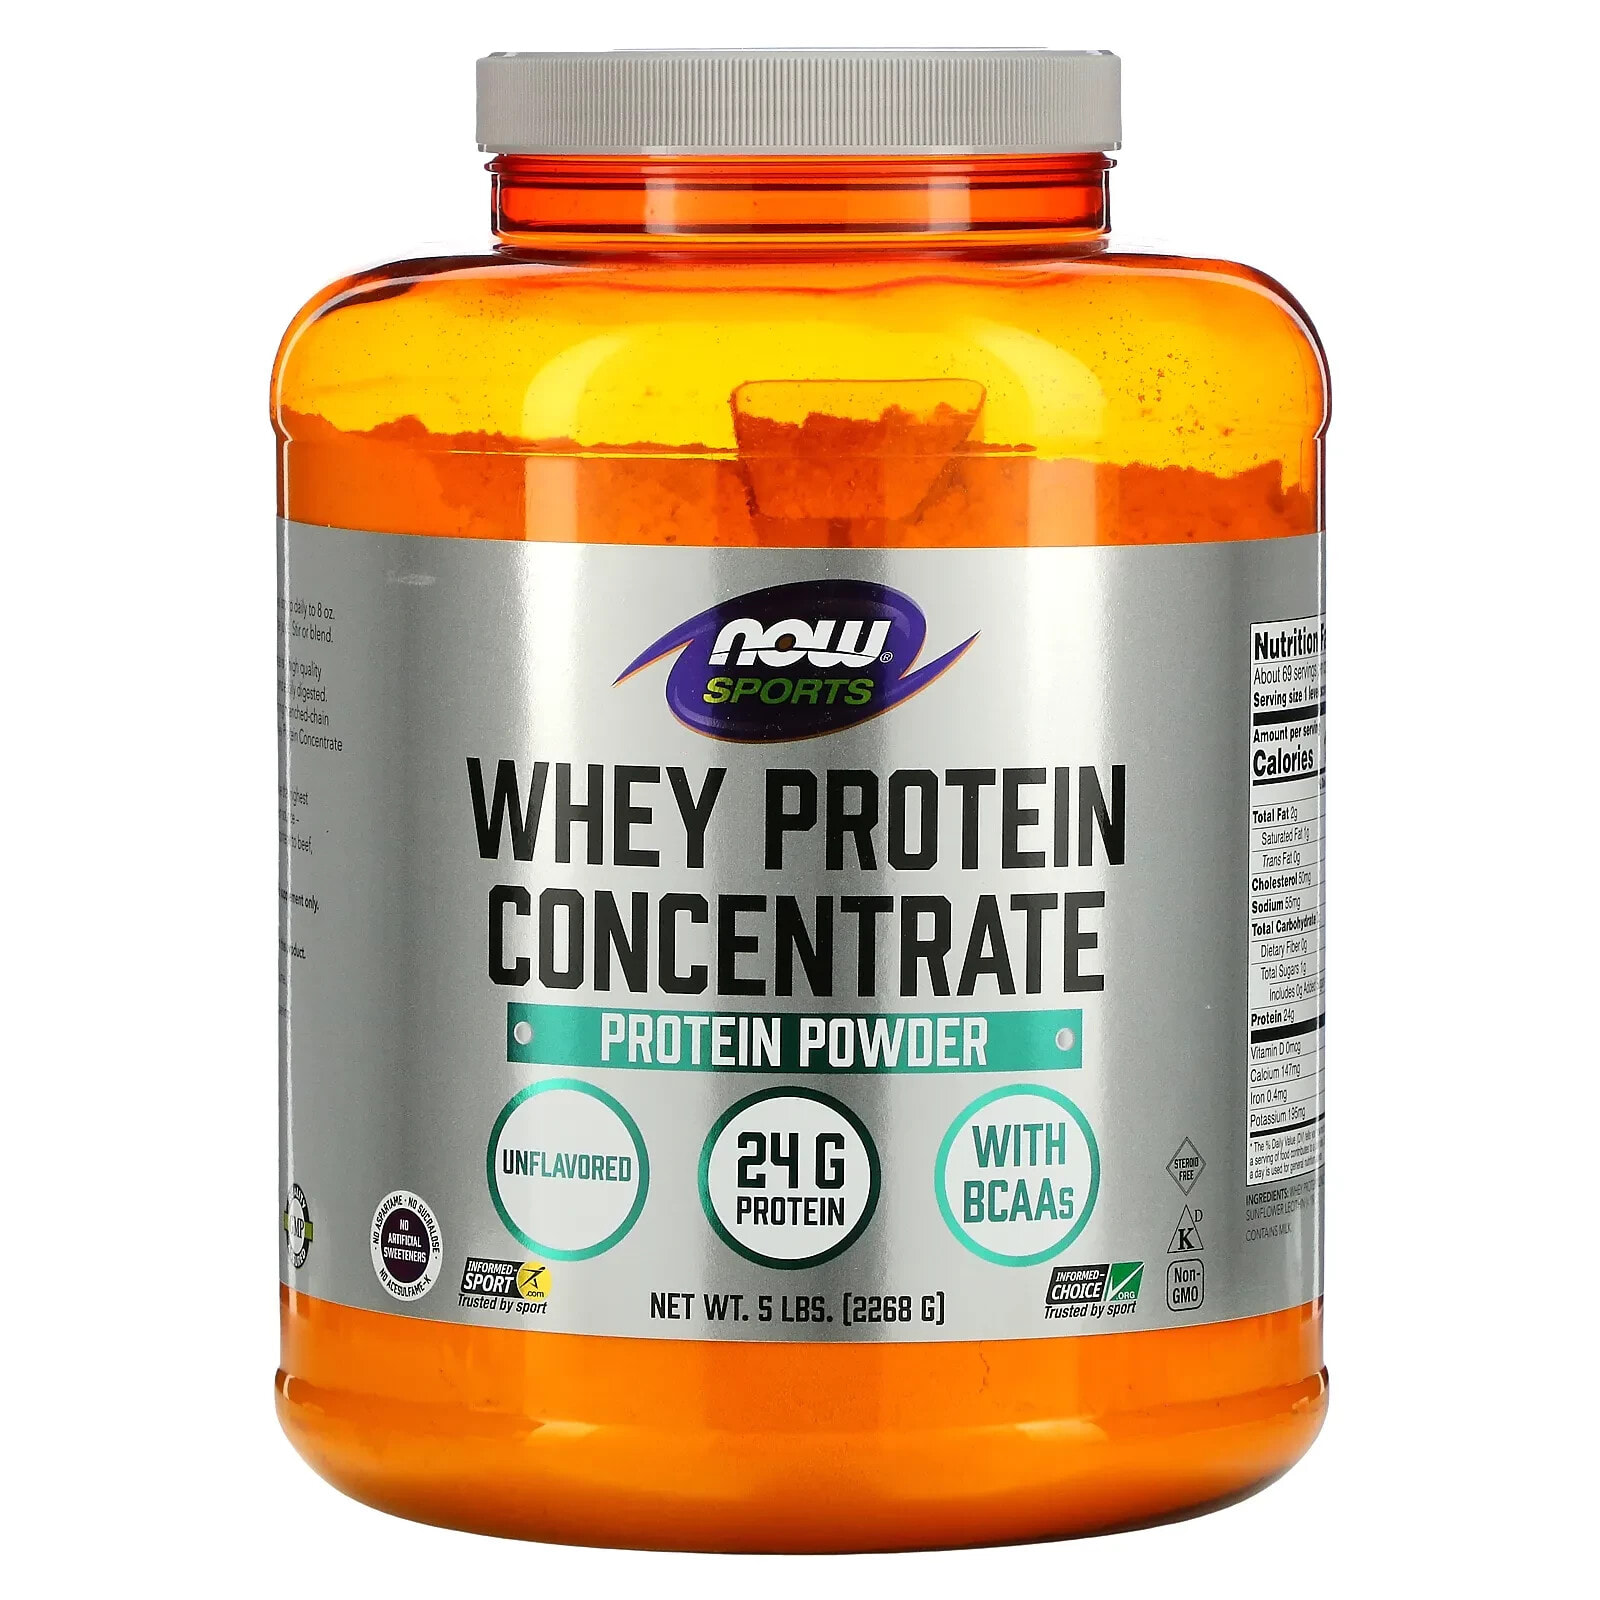 NOW Foods, Sports, Whey Protein Concentrate Protein Powder, Unflavored, 1.5 lbs (680 g)